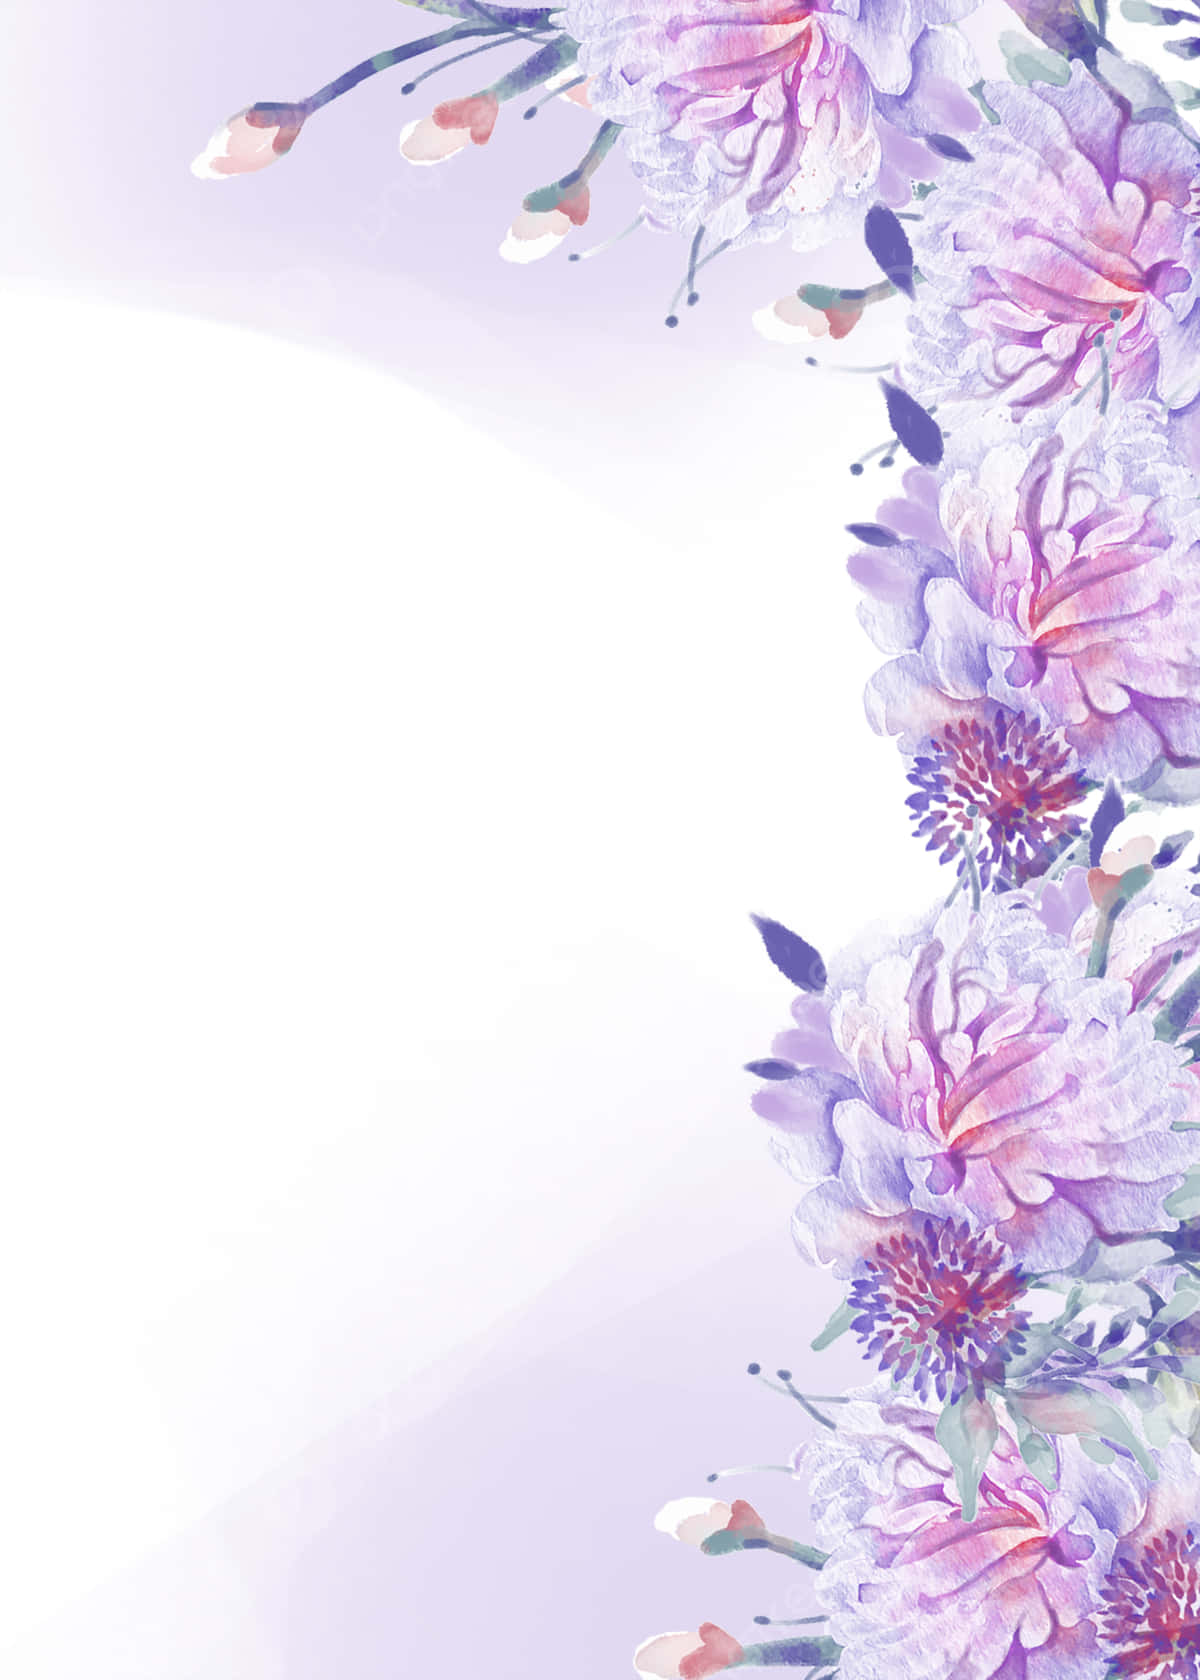 Watercolor Floral Background With Purple Flowers